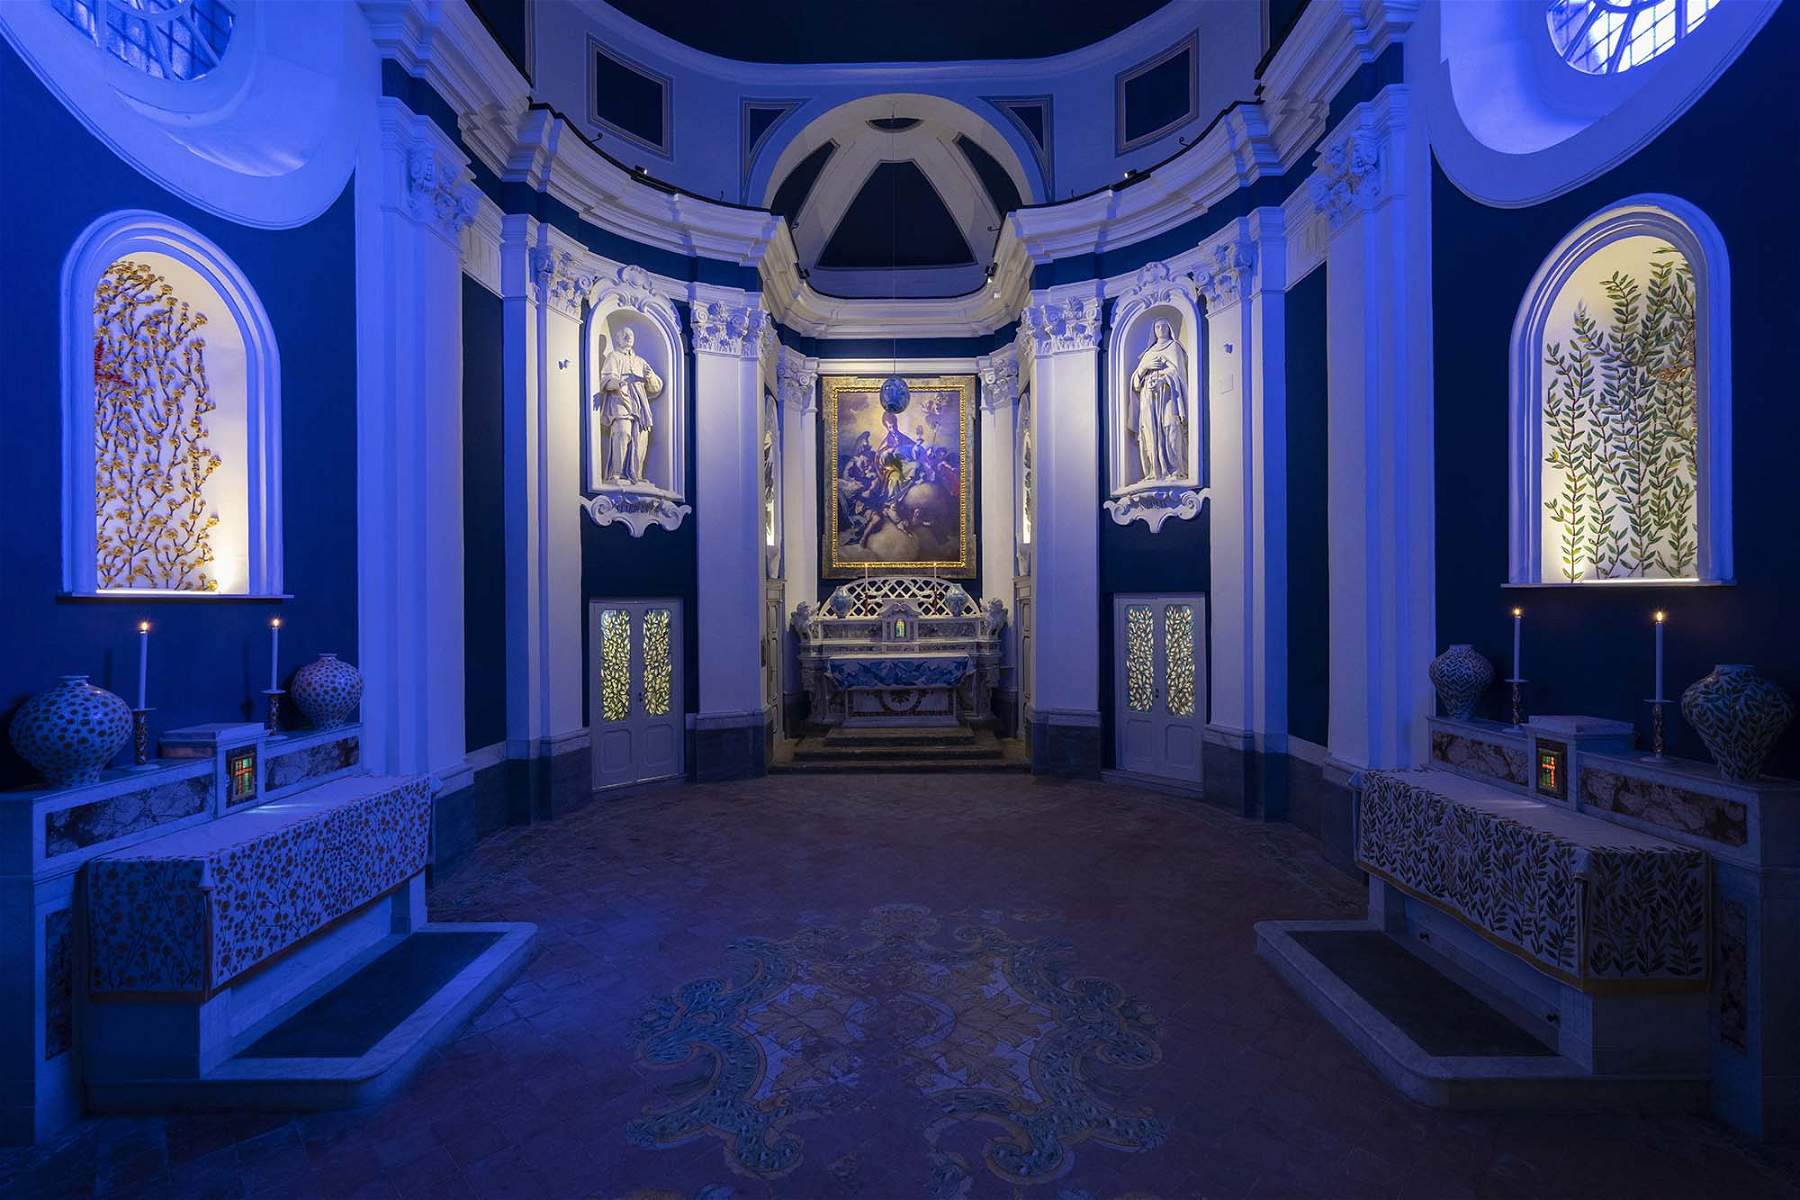 Naples, San Gennaro church in Capodimonte reopens after 50 years, redecorated by Calatrava